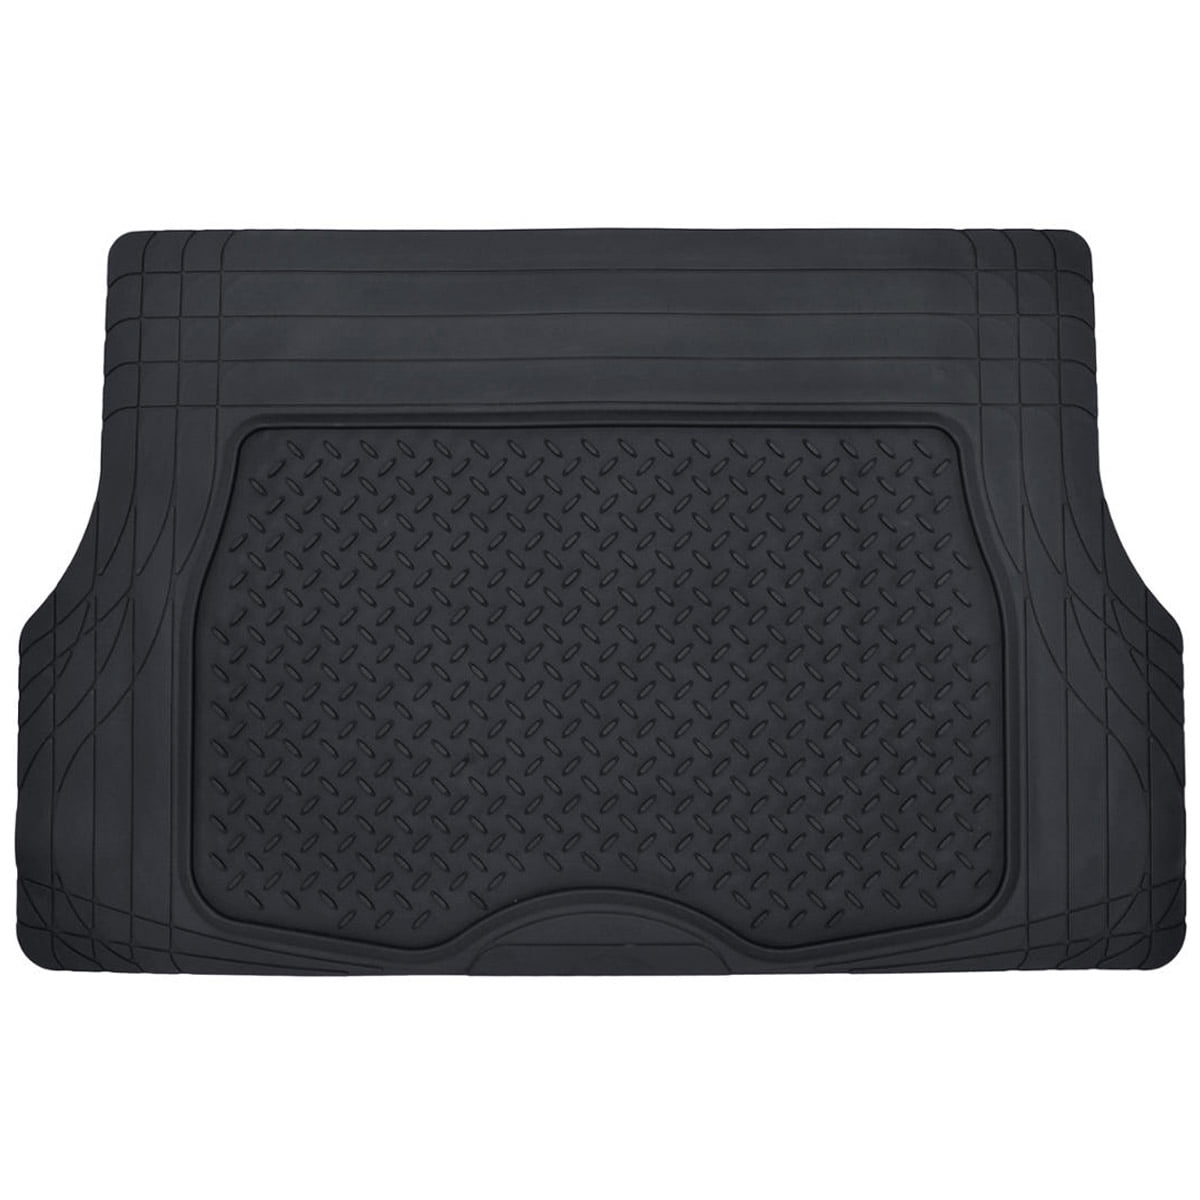 Photo 1 of Motor Trend Heavy-Duty Premium Rubber Cargo Floor Mat Trimmable Trunk Liner for Trucks and Sedans Multi Size